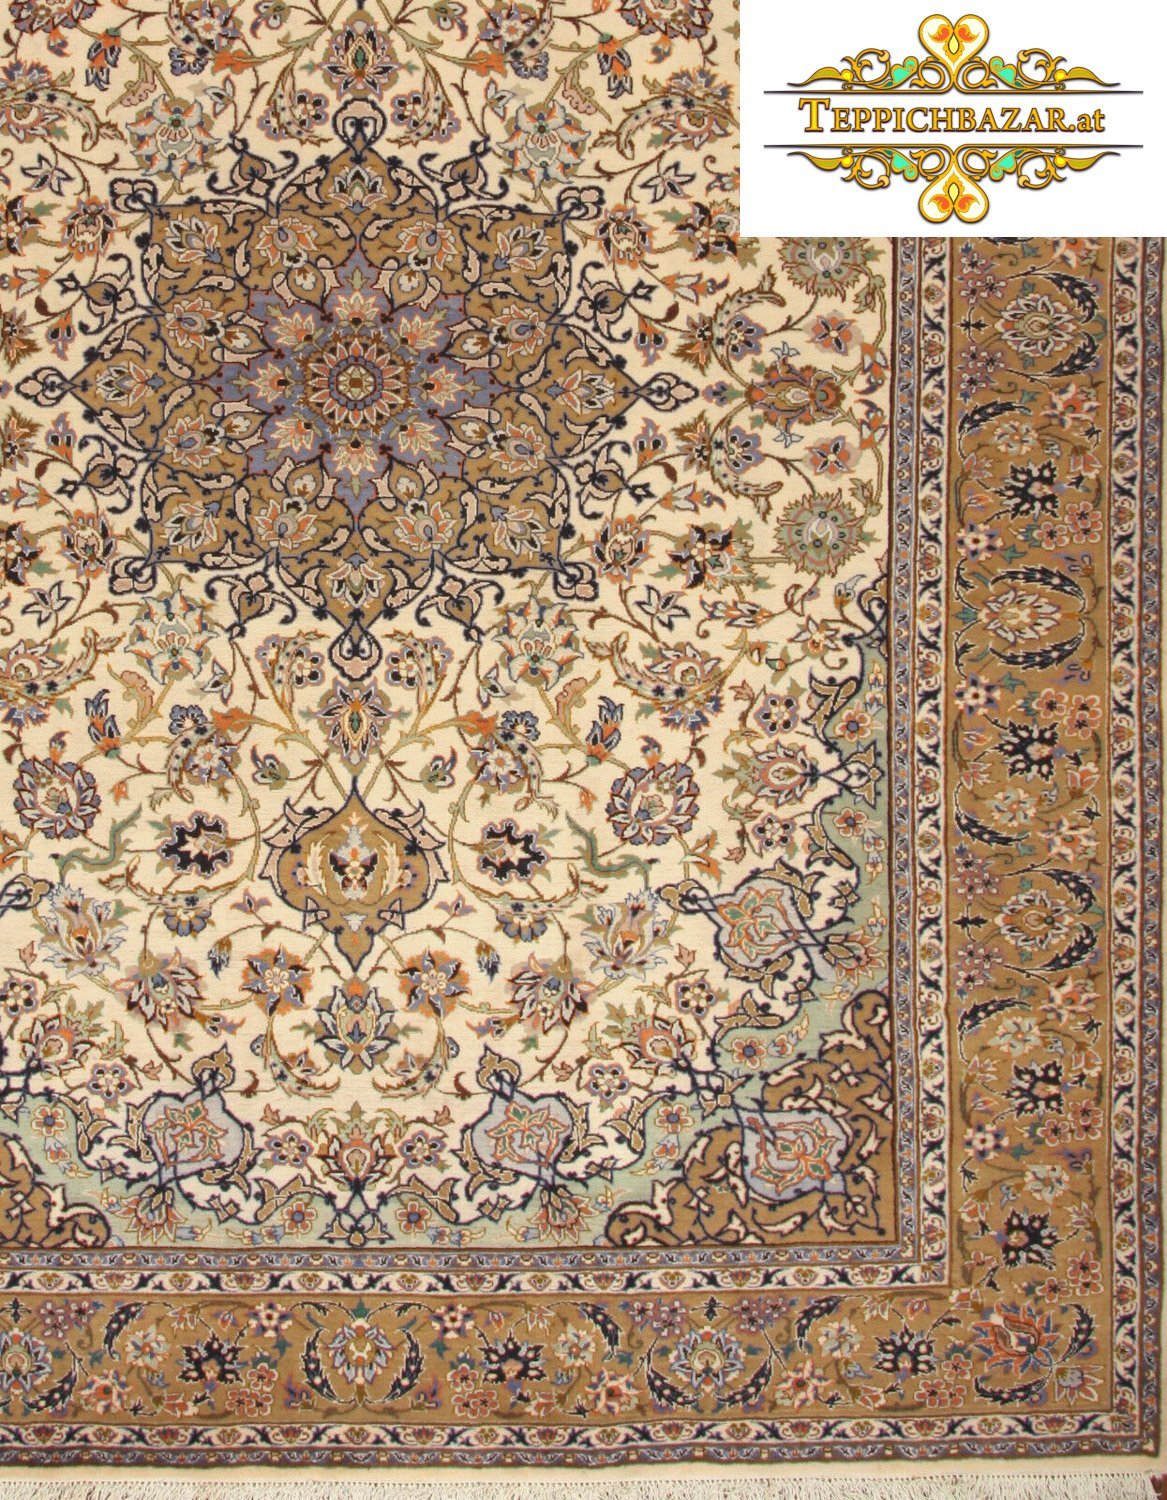 (#H1067) APPROX. 390X245CM HAND KNOTTED KASHAN (KASHAN) PERSIAN CARPET PERSIAN CARPET,KASHAN,KASHAN,WOOL,ORIENTAL CARPET,CARPET BAZAR,CARP,RUGS,PATTERNS,ZIEGLER,ORIENTAL CARPETS TYPE: PERSIAN CARPET WITH SIGNATURE ORIGIN: KASHAN (KASHAN) FLOOR: 100% W ROLLS WITHOUT ADDITION CHAIN: 100% COTTON SIZE: 390X245CM KNOT COUNT: APPROX. 160.000 KNOTS PER M² CONDITION: VERY GOOD, IN TOP CONDITION PERSIAN CARPET ORIENTAL CARPET